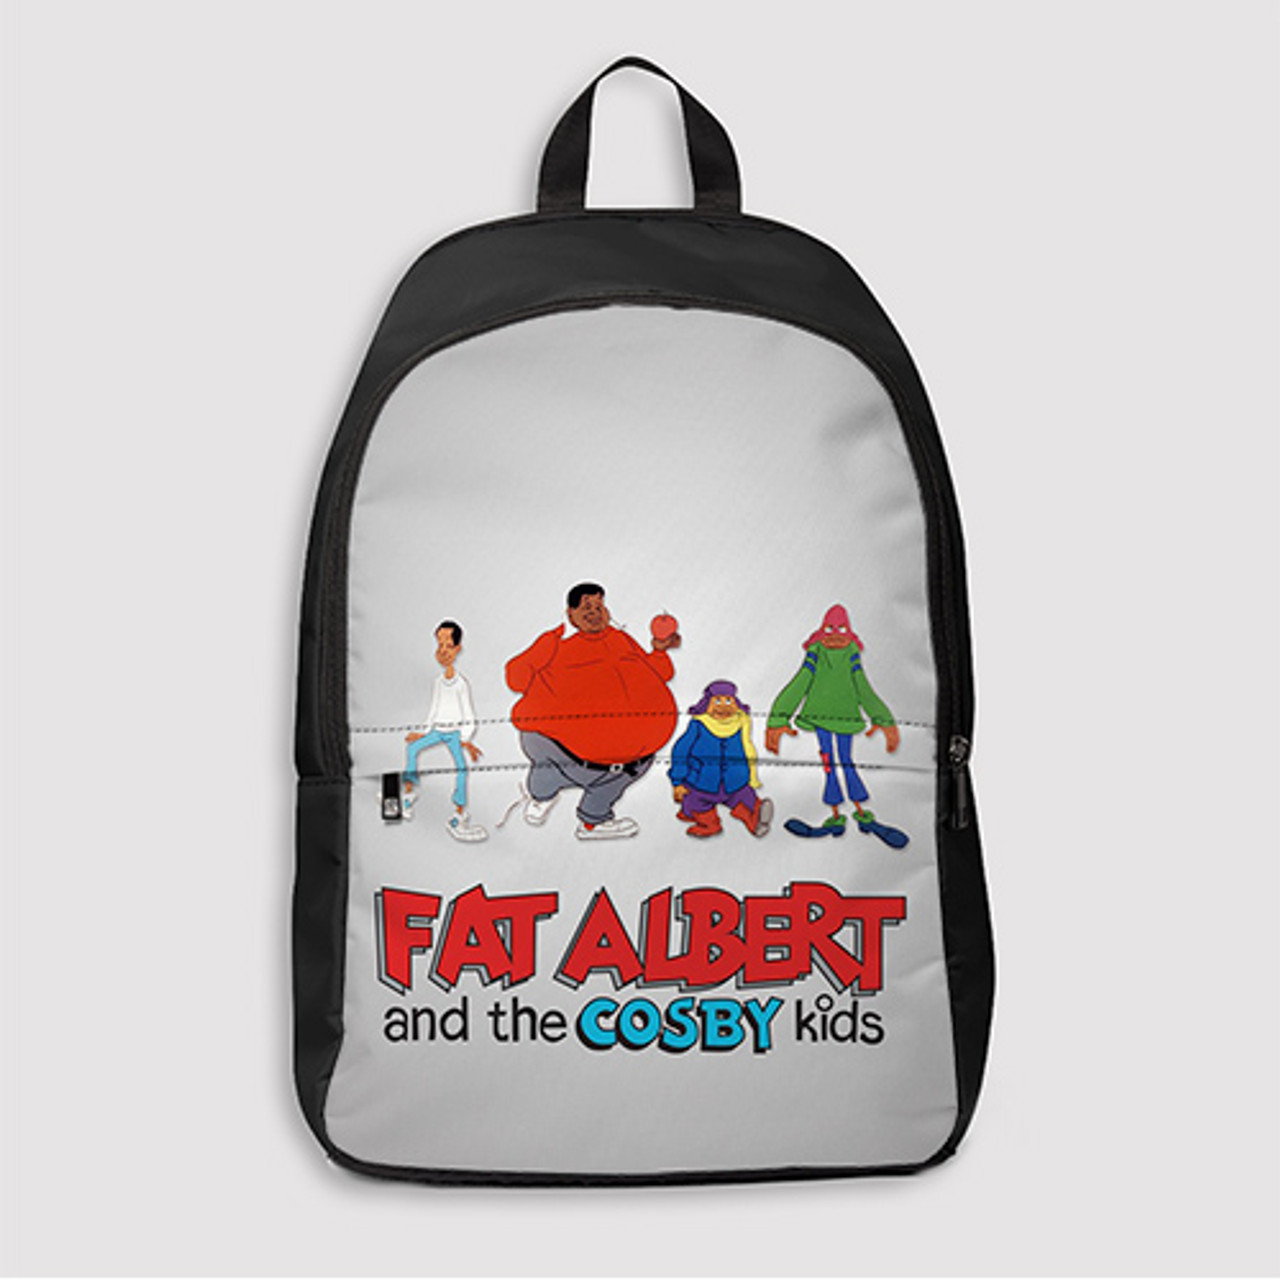 Fat Albert and the Cosby Kids Lunch Box